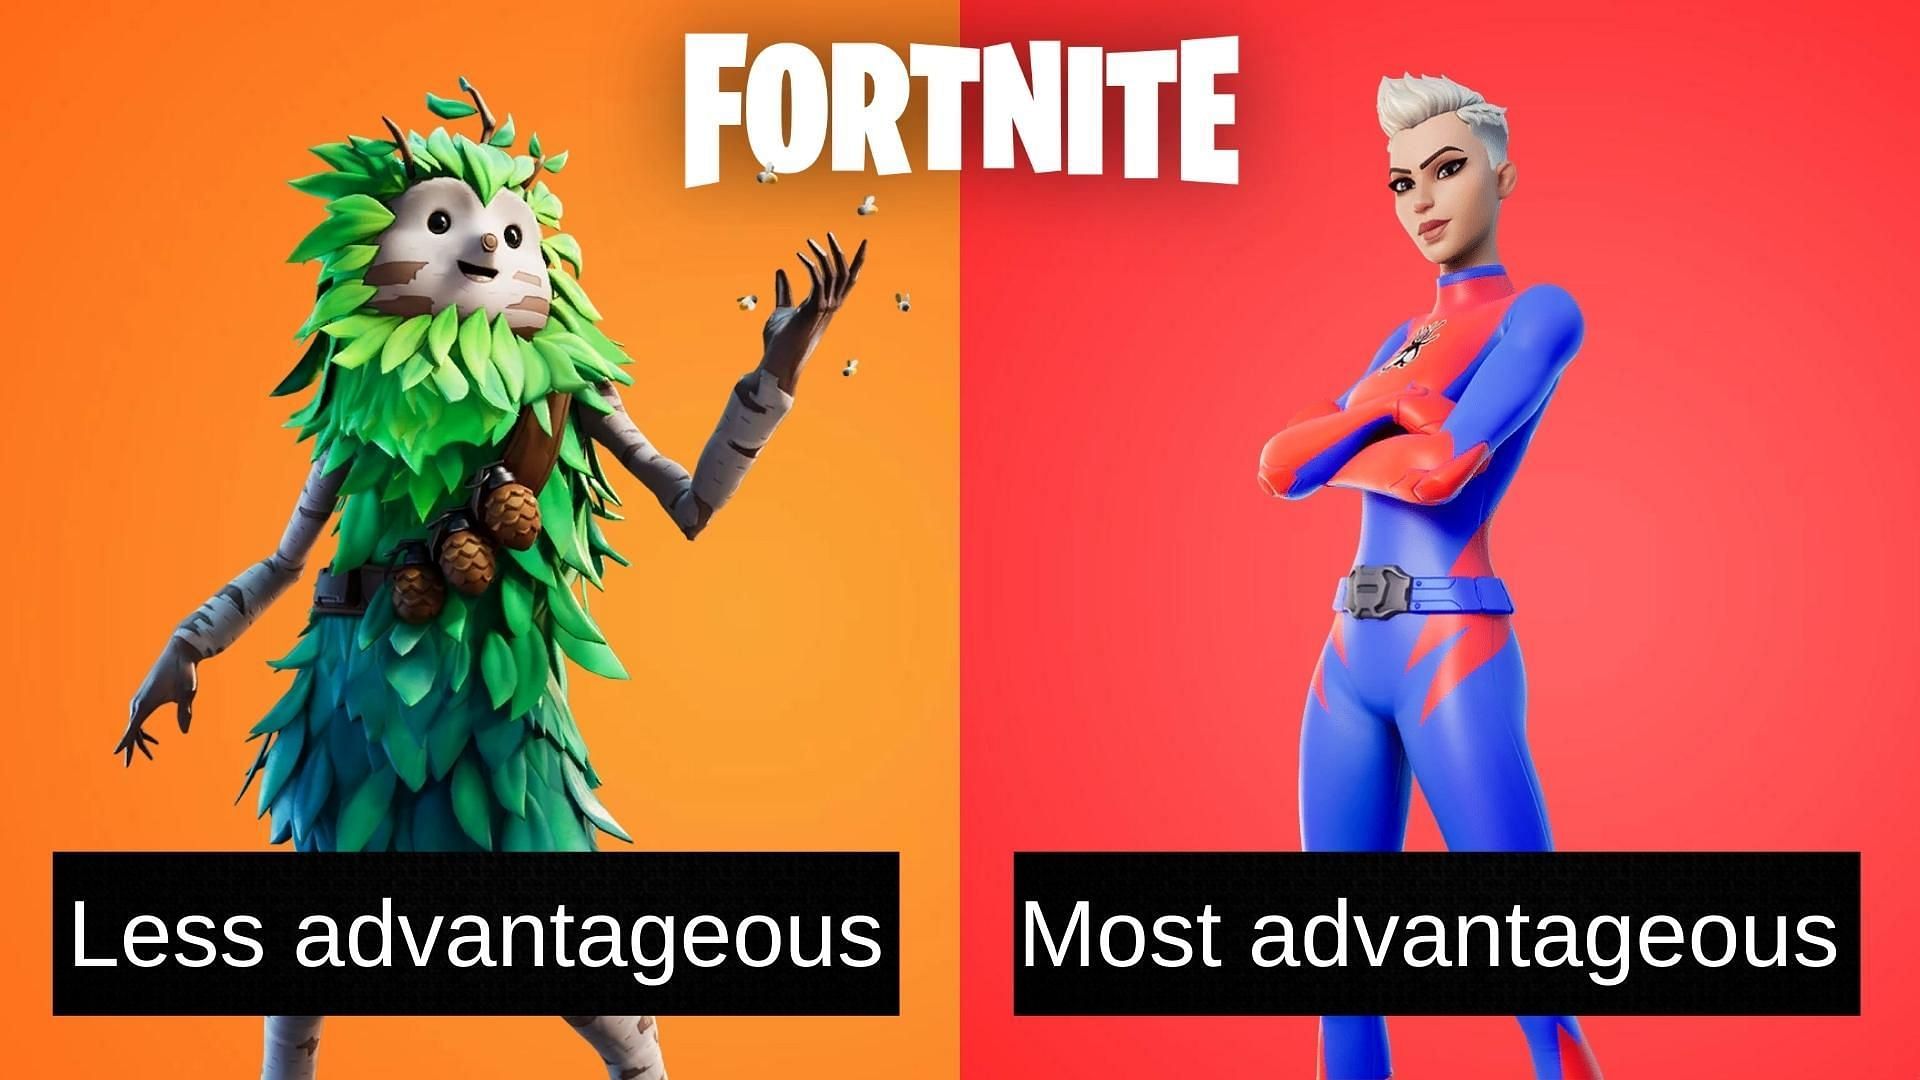 8 Pay-to-win Fortnite skins ranked from most advantageous to least (Image via Sportskeeda)